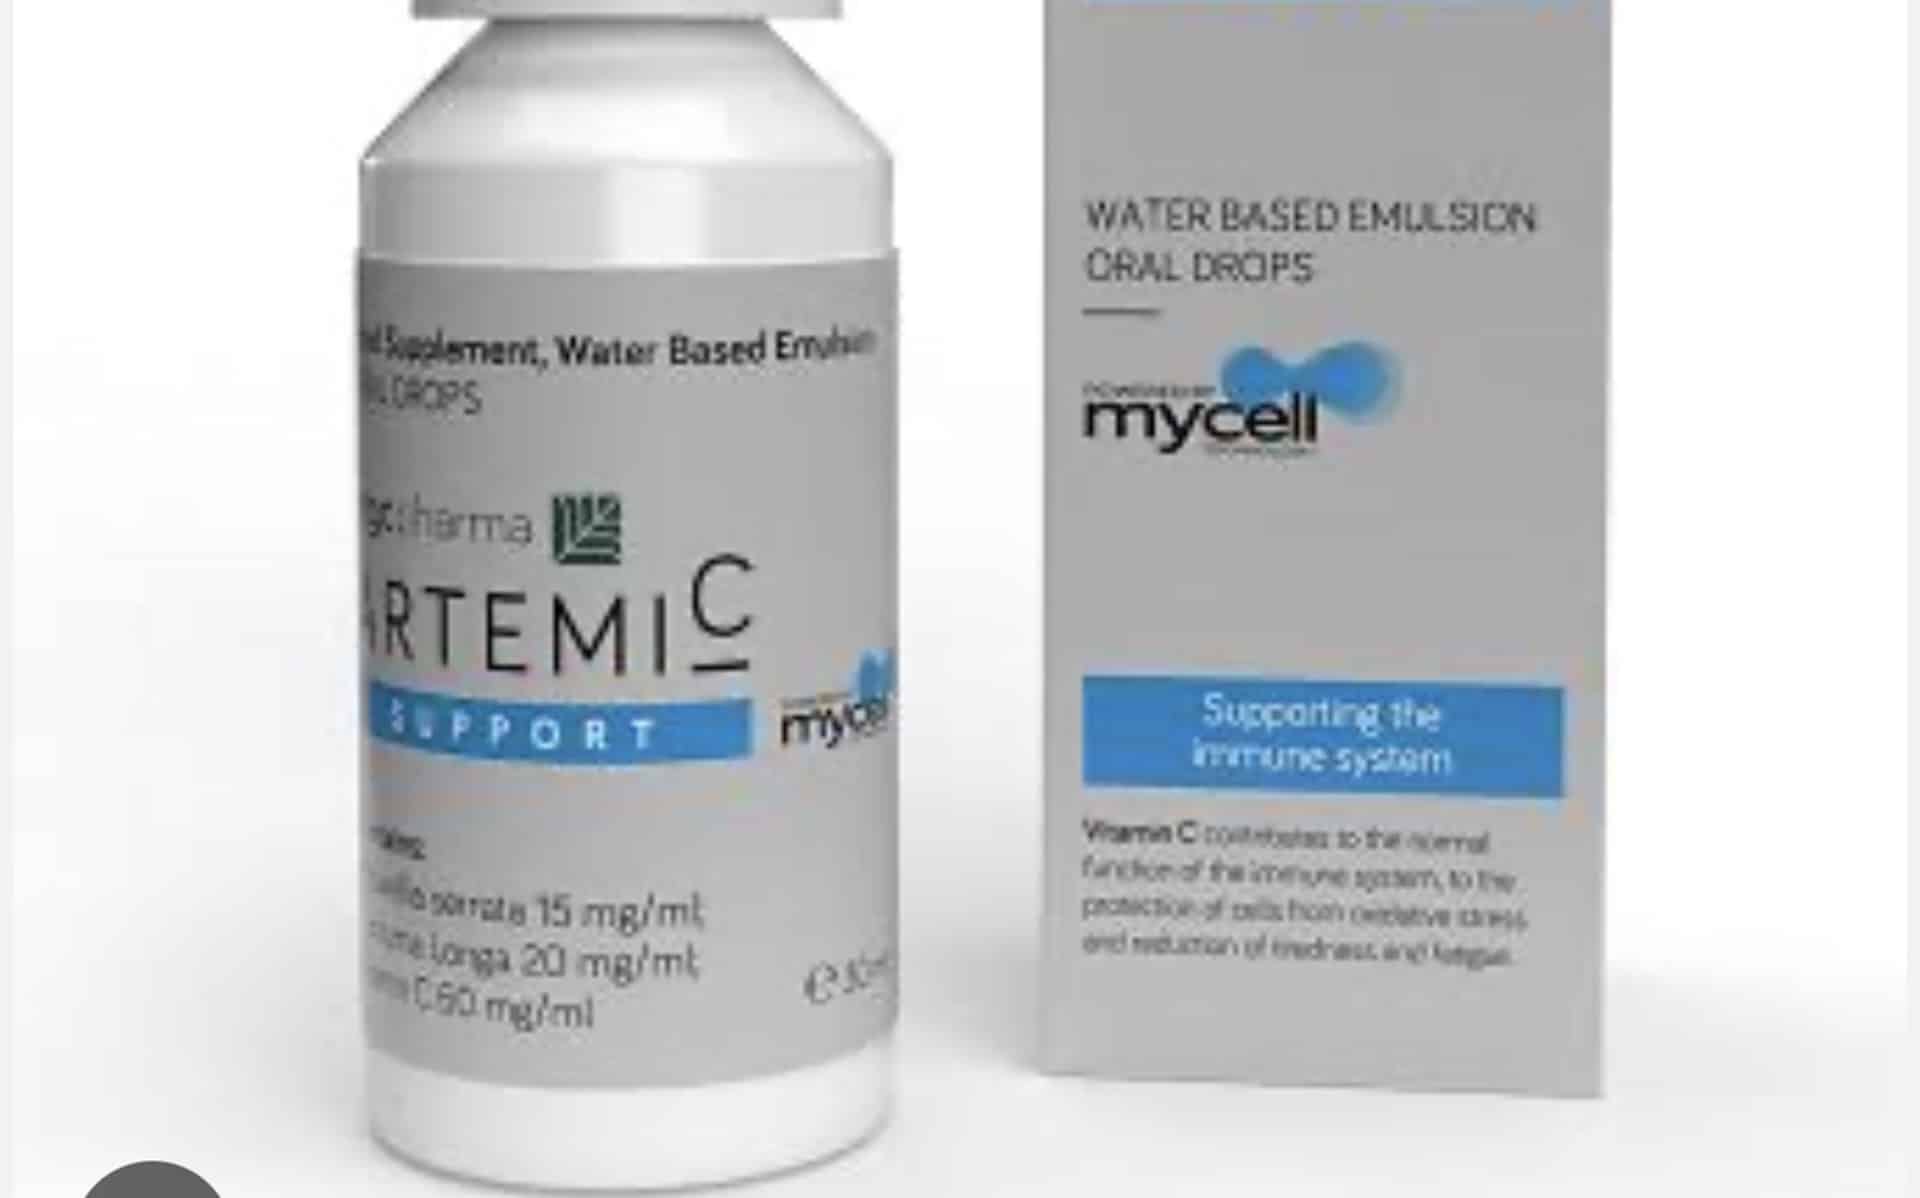 MGC Pharma in collaboration with HempStreet launches ArtemiC, a mouth spray for severe COVID-19 symptoms